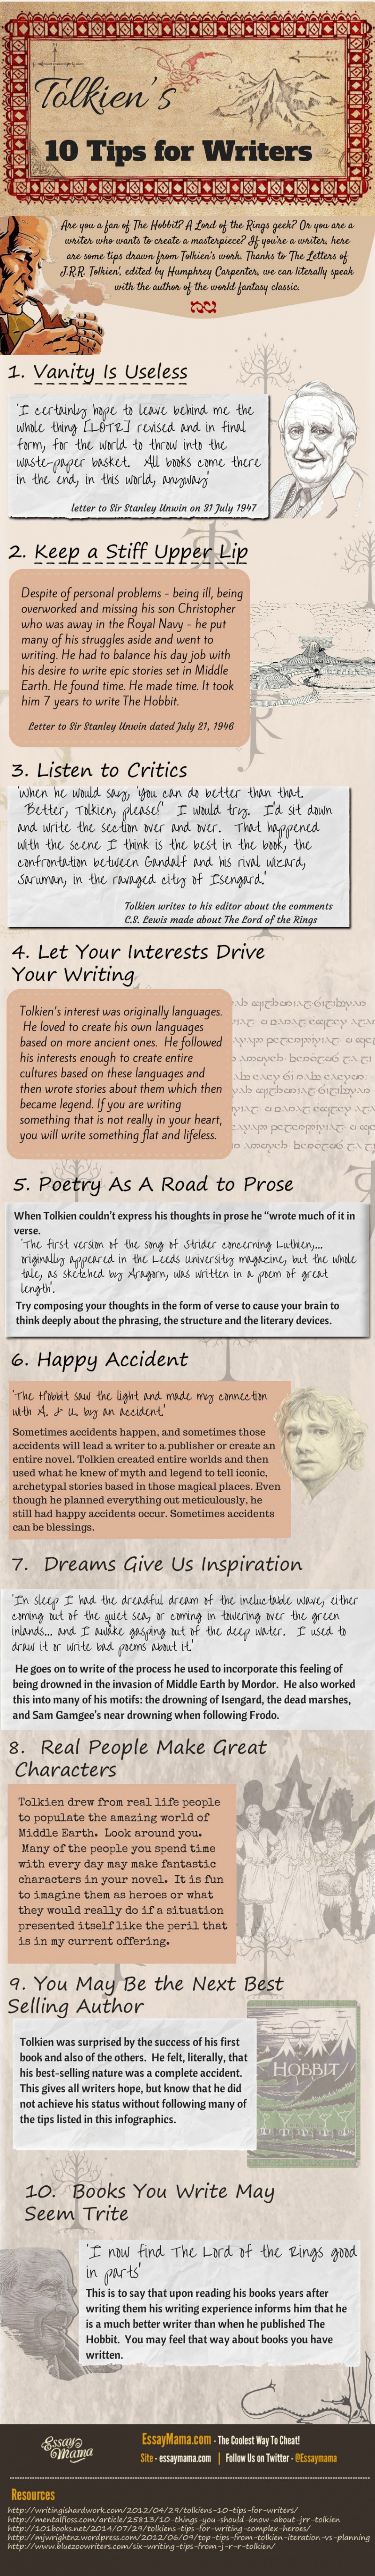 Tolkien's 10 Tips For Writers